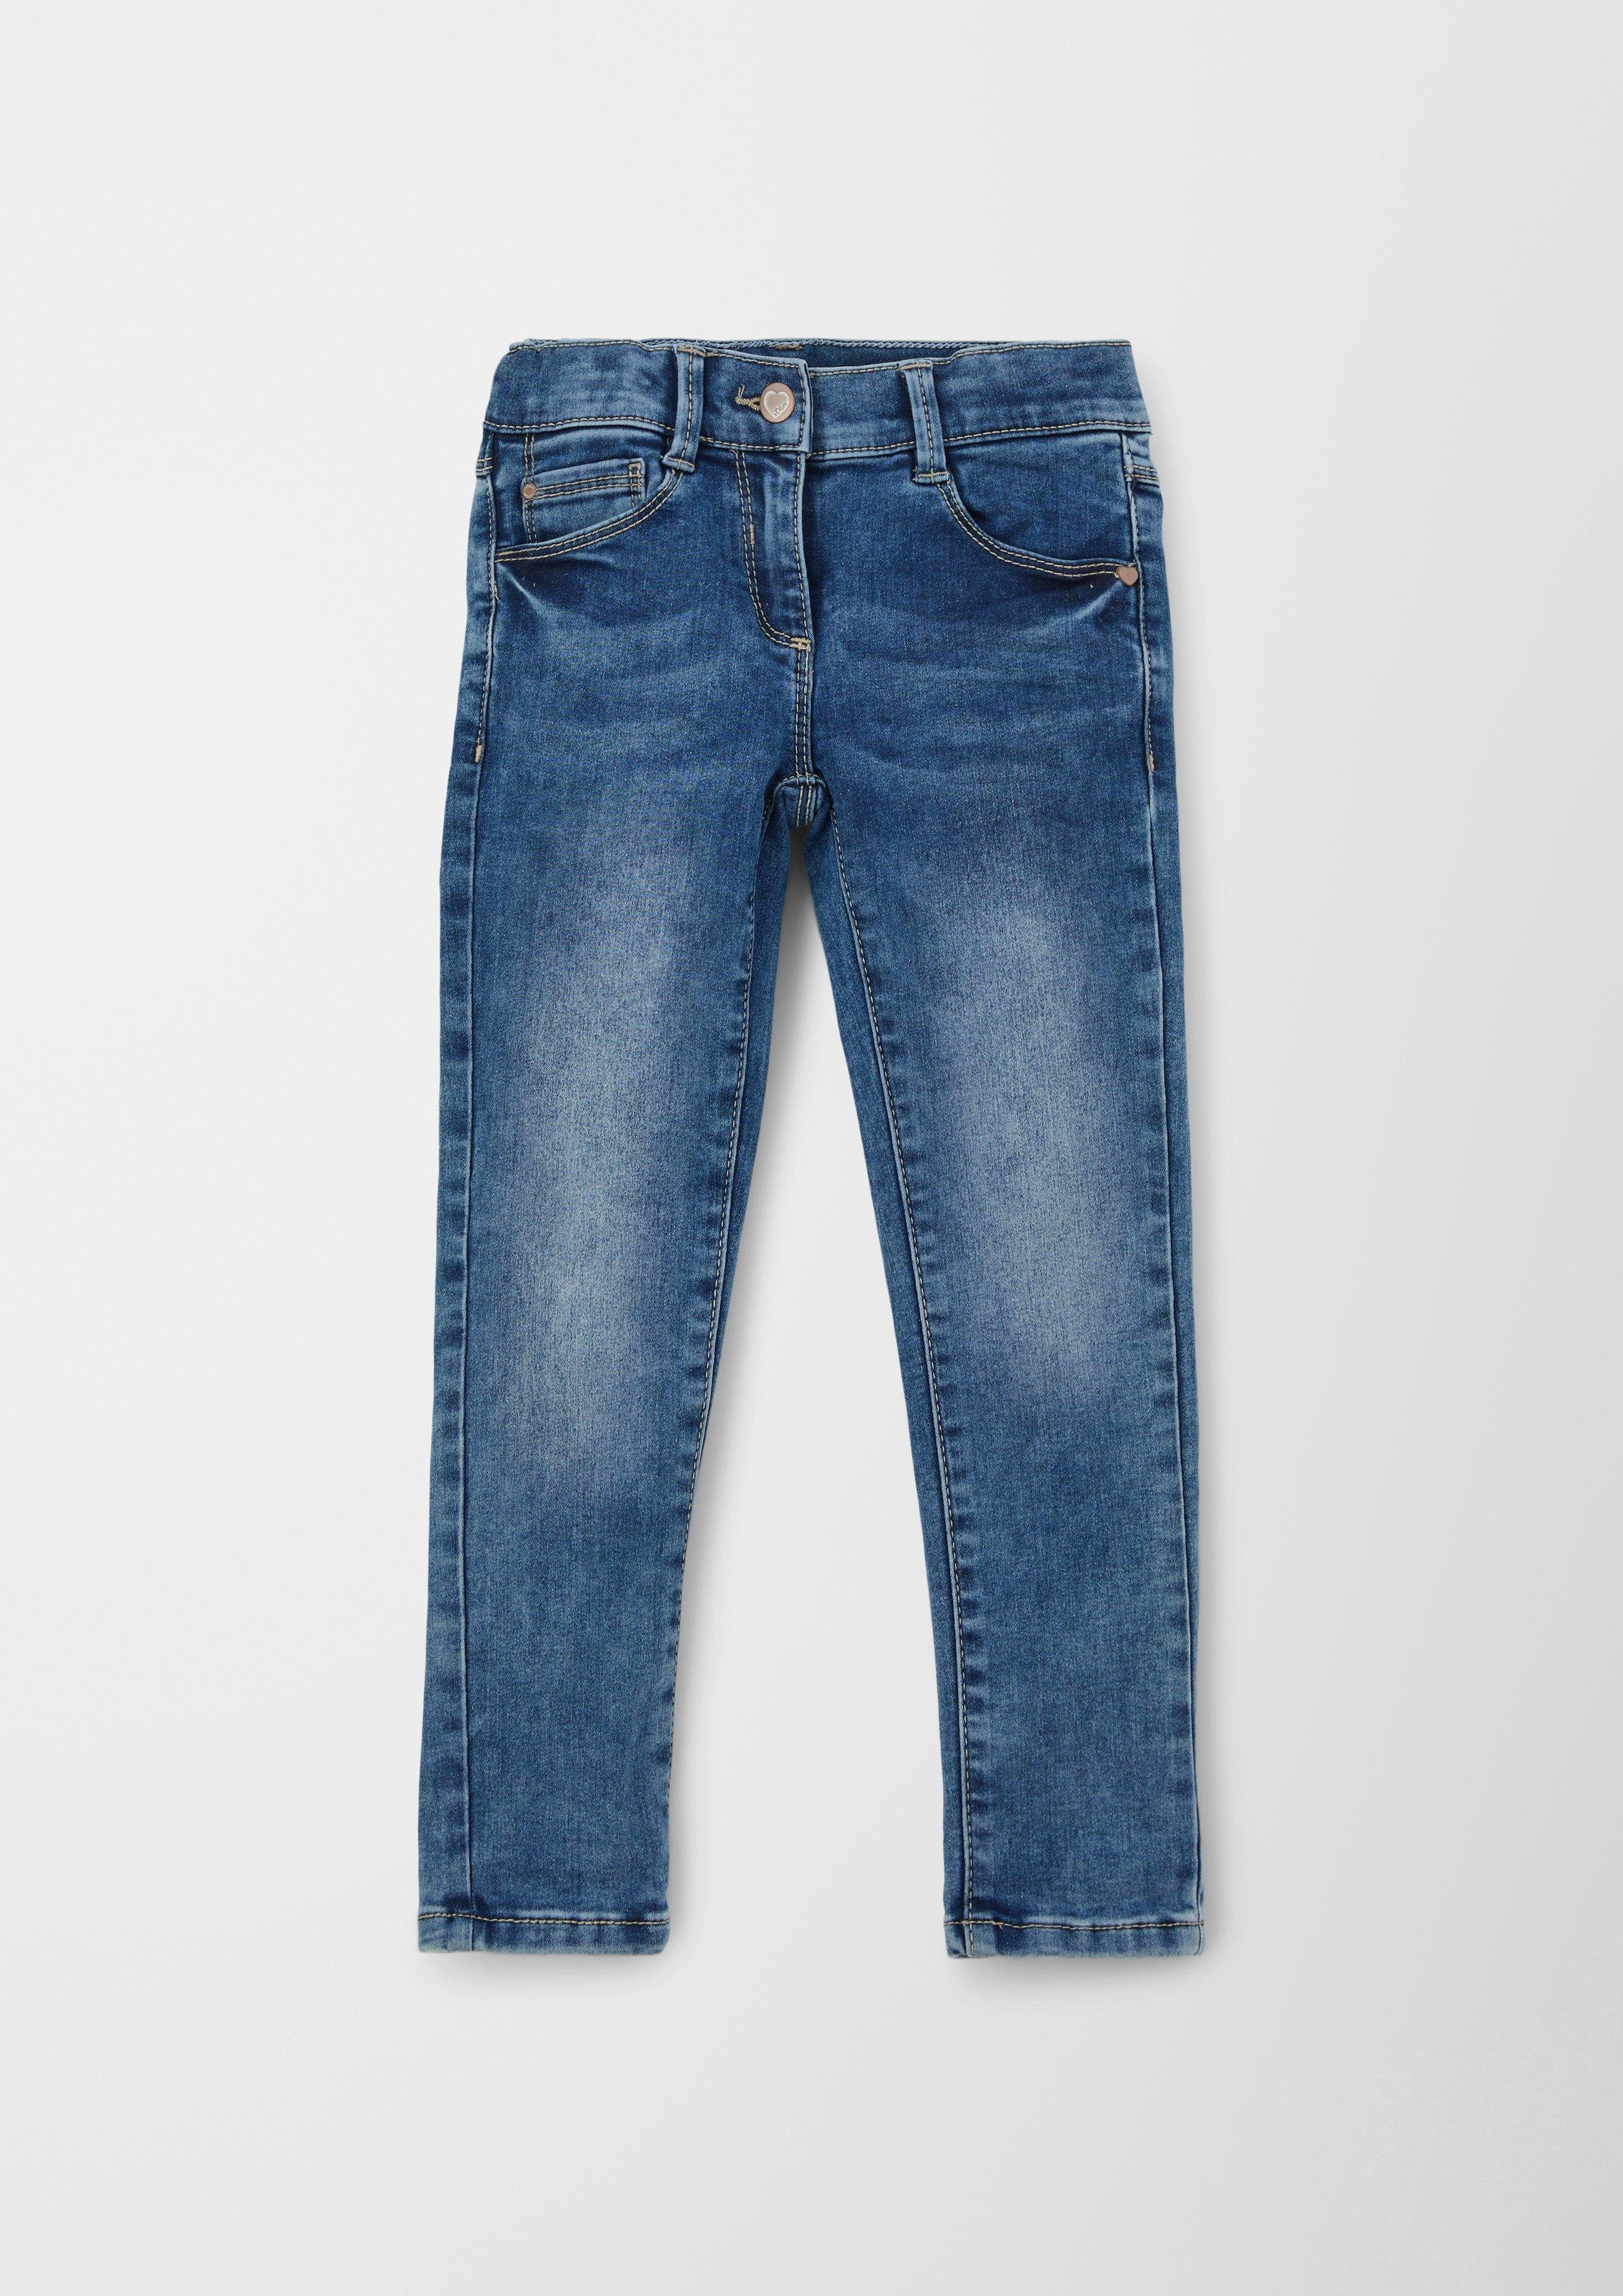 s.Oliver Junior s.Oliver Stoffhose Jeans Skinny Kathy / Slim Fit / Mid Rise / Skinny Leg Waschung